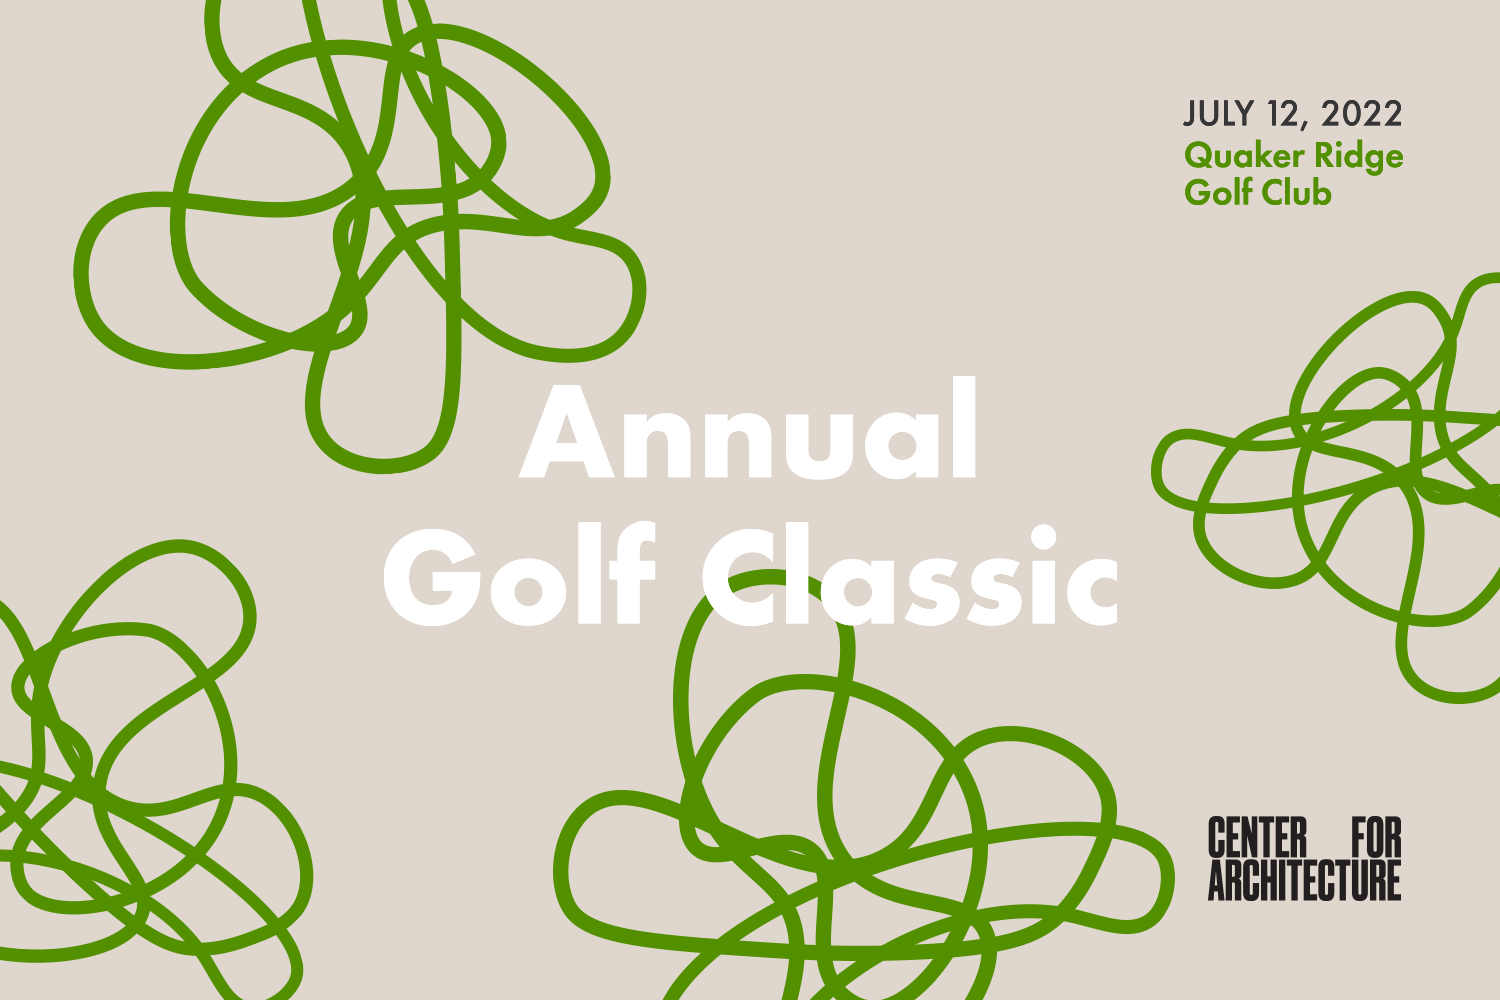 Promotional graphic for the Annual Golf Classic 2022